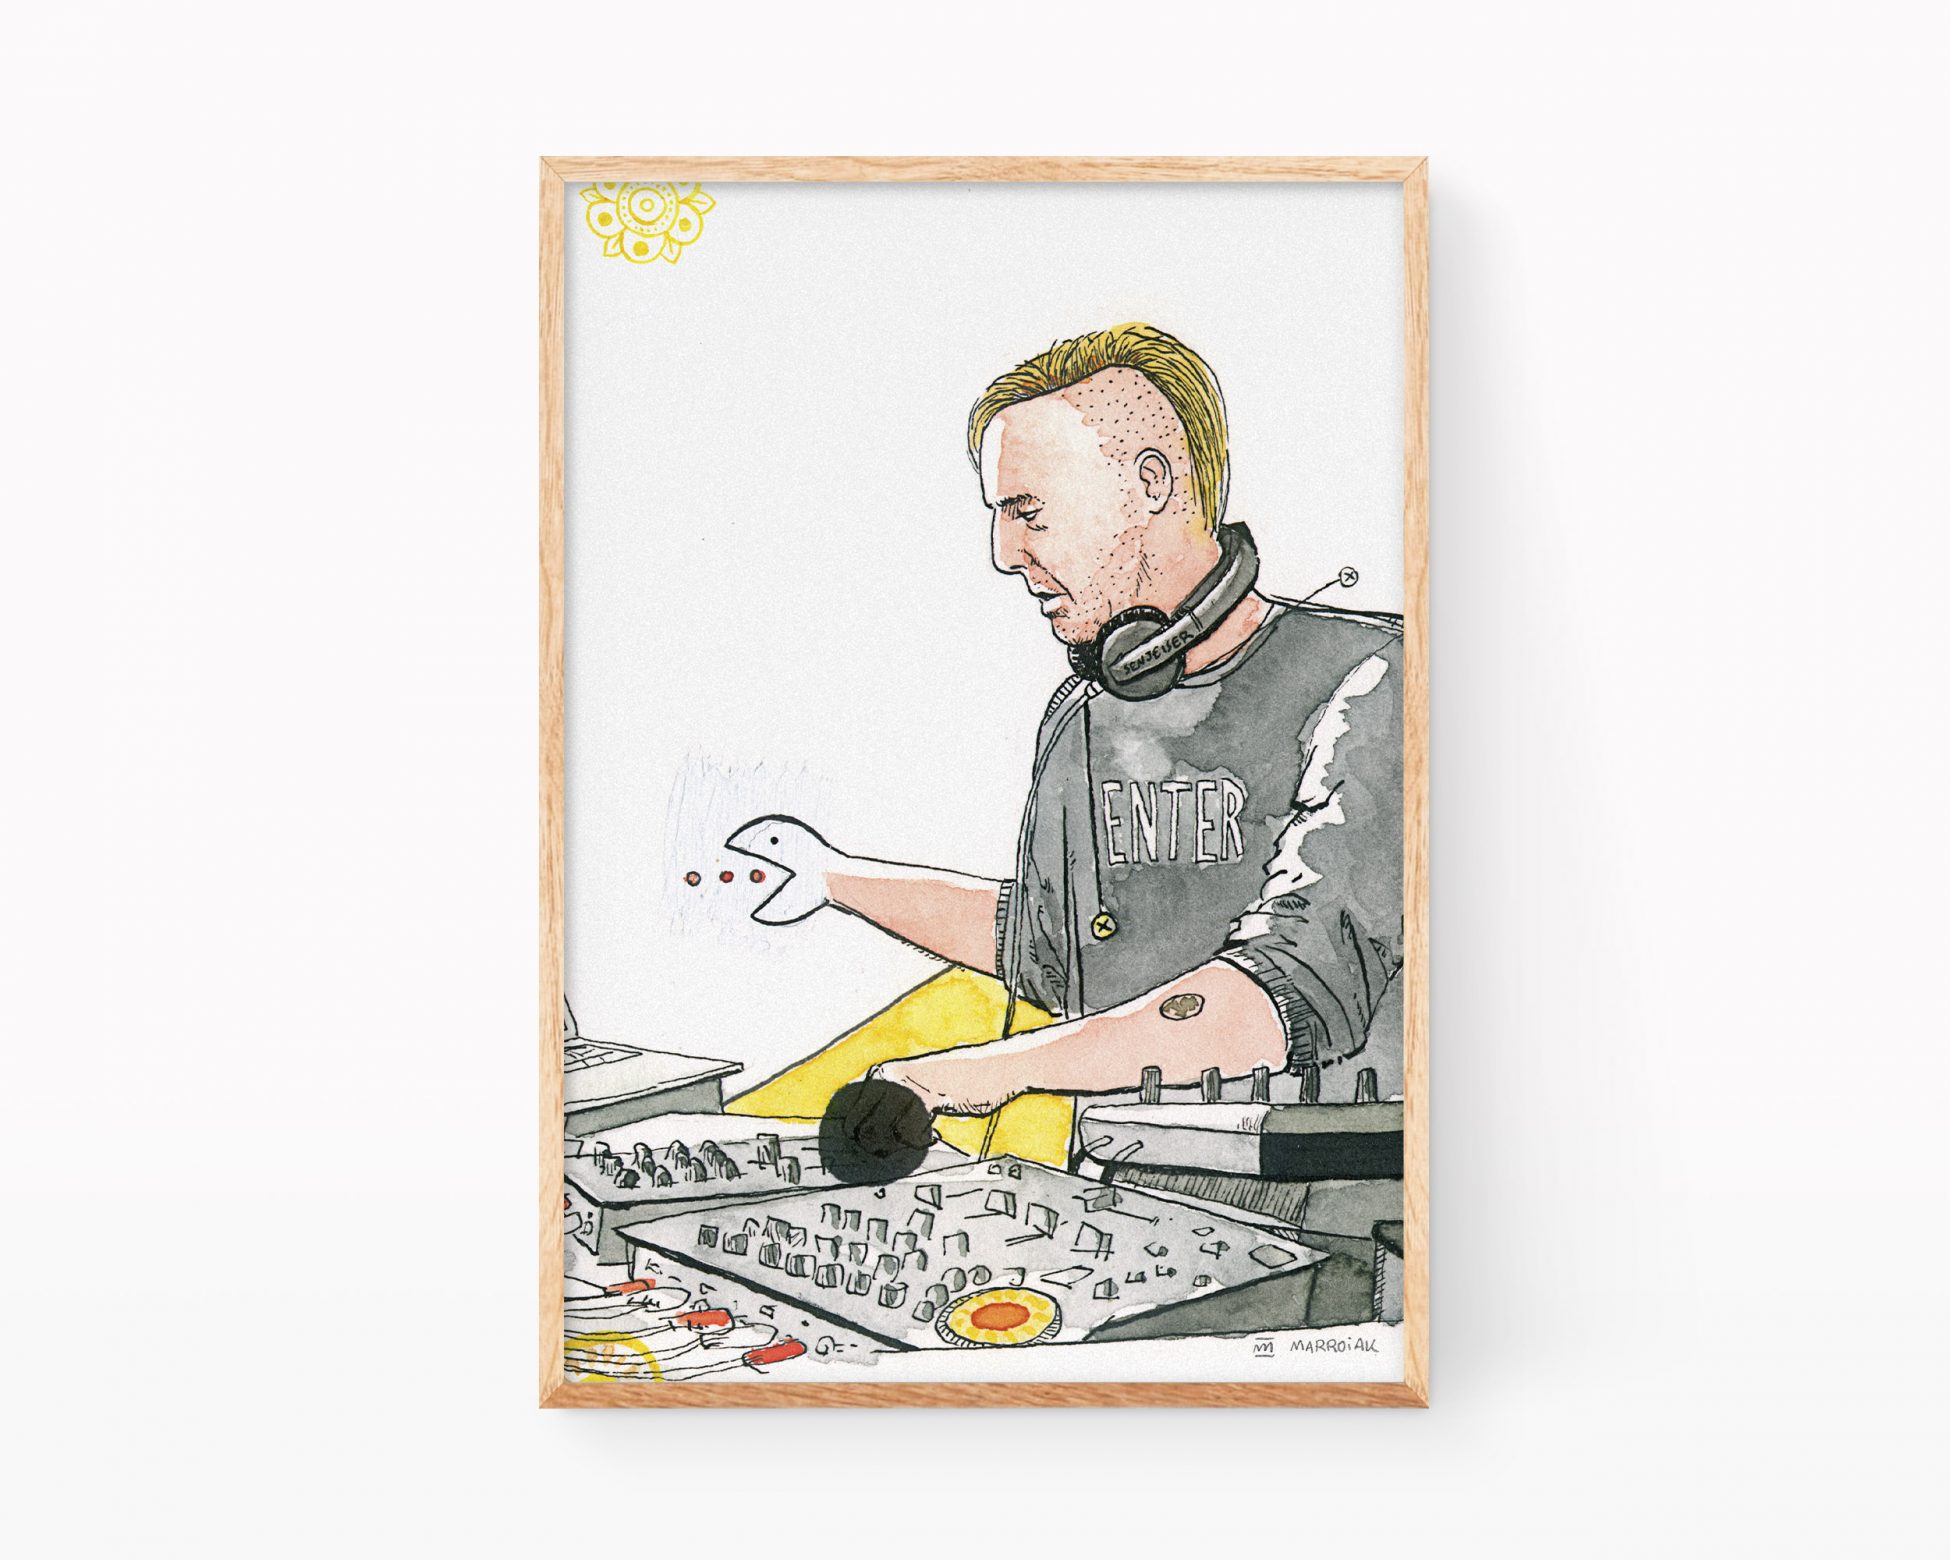 Richie Hawtin portrait painting. Illustrations of djs and producers of electronic music, techno and house. exclusive drawings